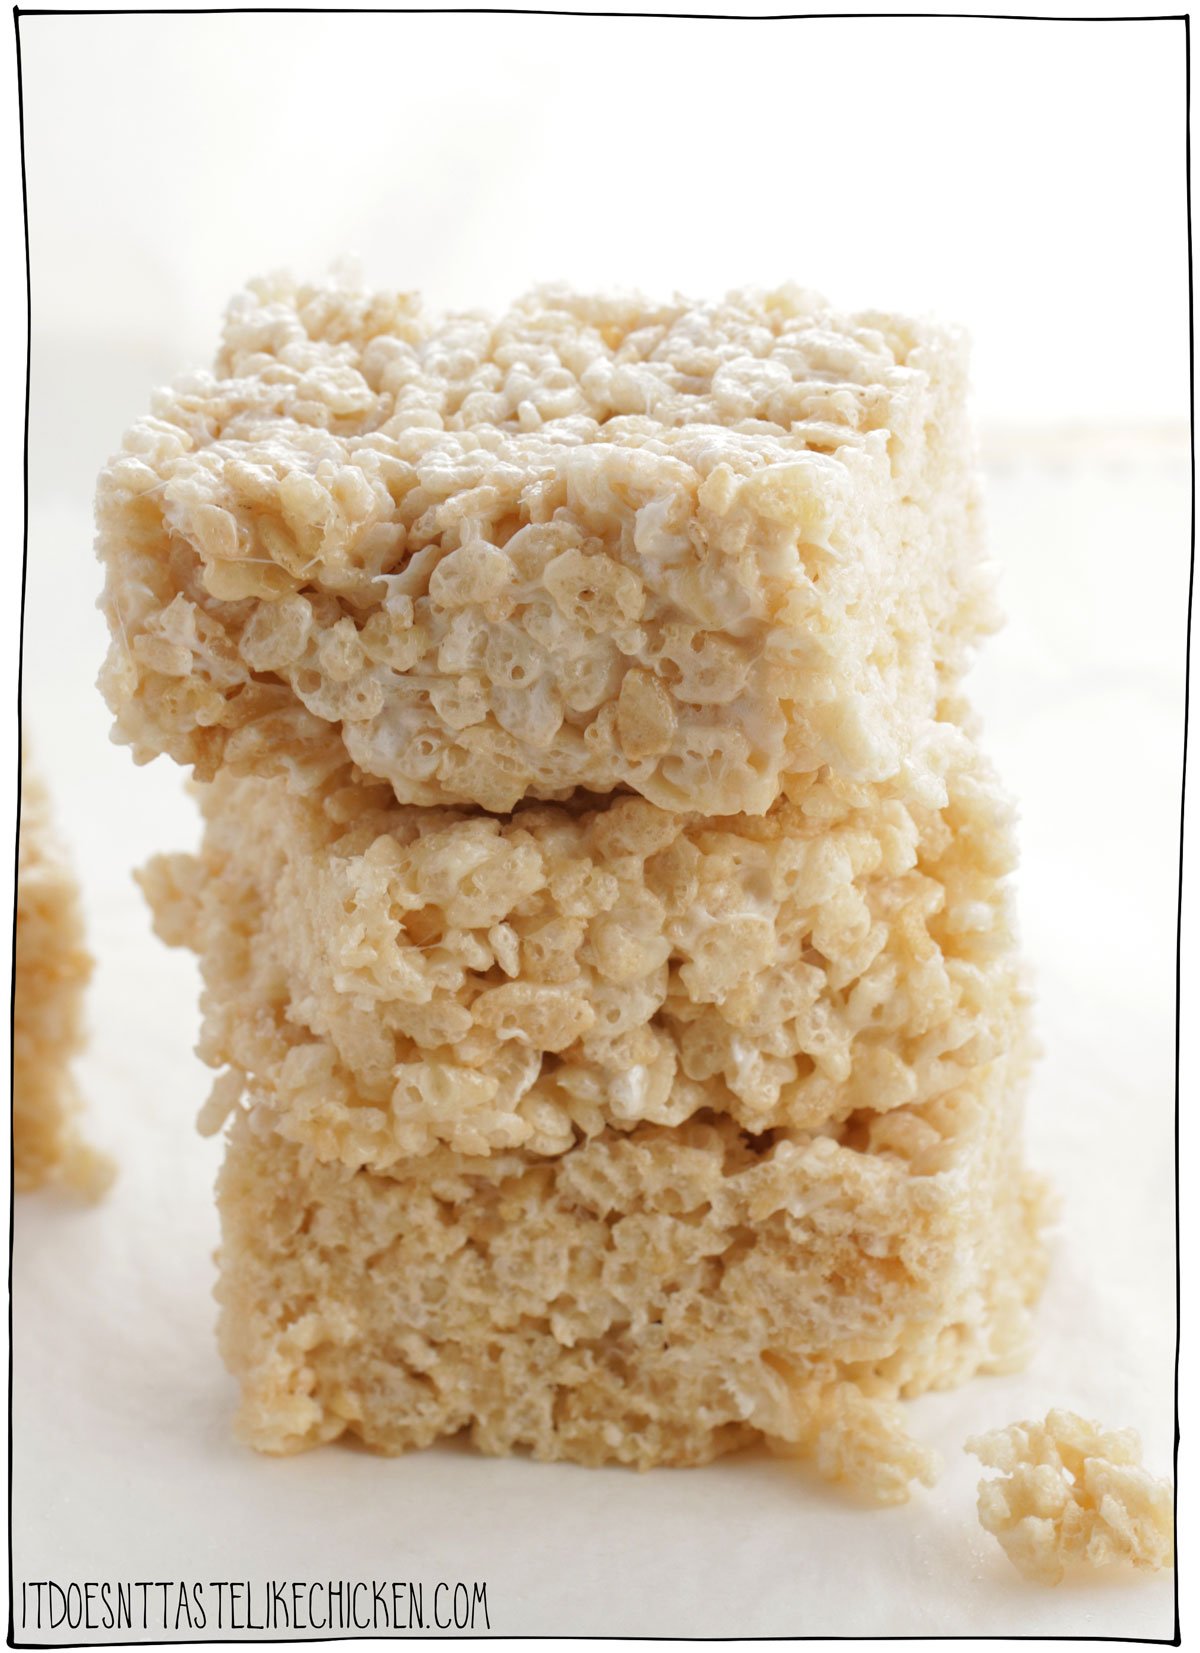 The best vegan rice Krispie squares! Just 10 minutes to whip up and only 6 simple ingredients. I also share with you my super-secret ingredient that makes these vegan rice Krispie treats the absolute hands-down best! Hint: these rice Krispie squares have a very slight birthday cake flavor!! Ooey gooey marshmallow with crispy rice cereal, talk about snack perfection. #itdoesnttastelikechicken #vegandesserts